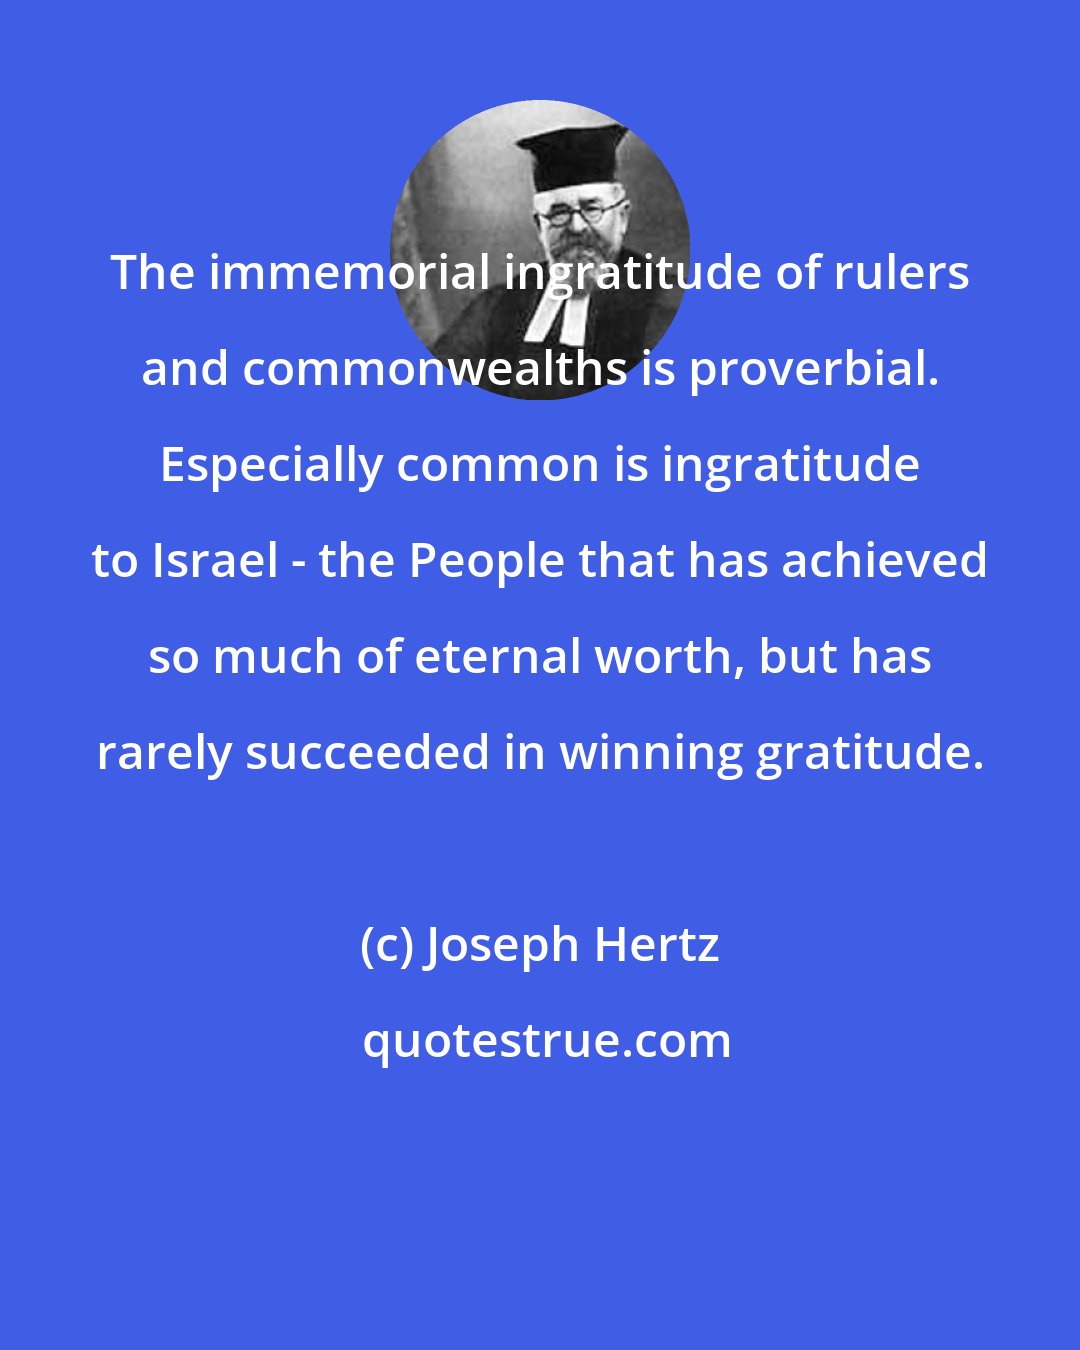 Joseph Hertz: The immemorial ingratitude of rulers and commonwealths is proverbial. Especially common is ingratitude to Israel - the People that has achieved so much of eternal worth, but has rarely succeeded in winning gratitude.